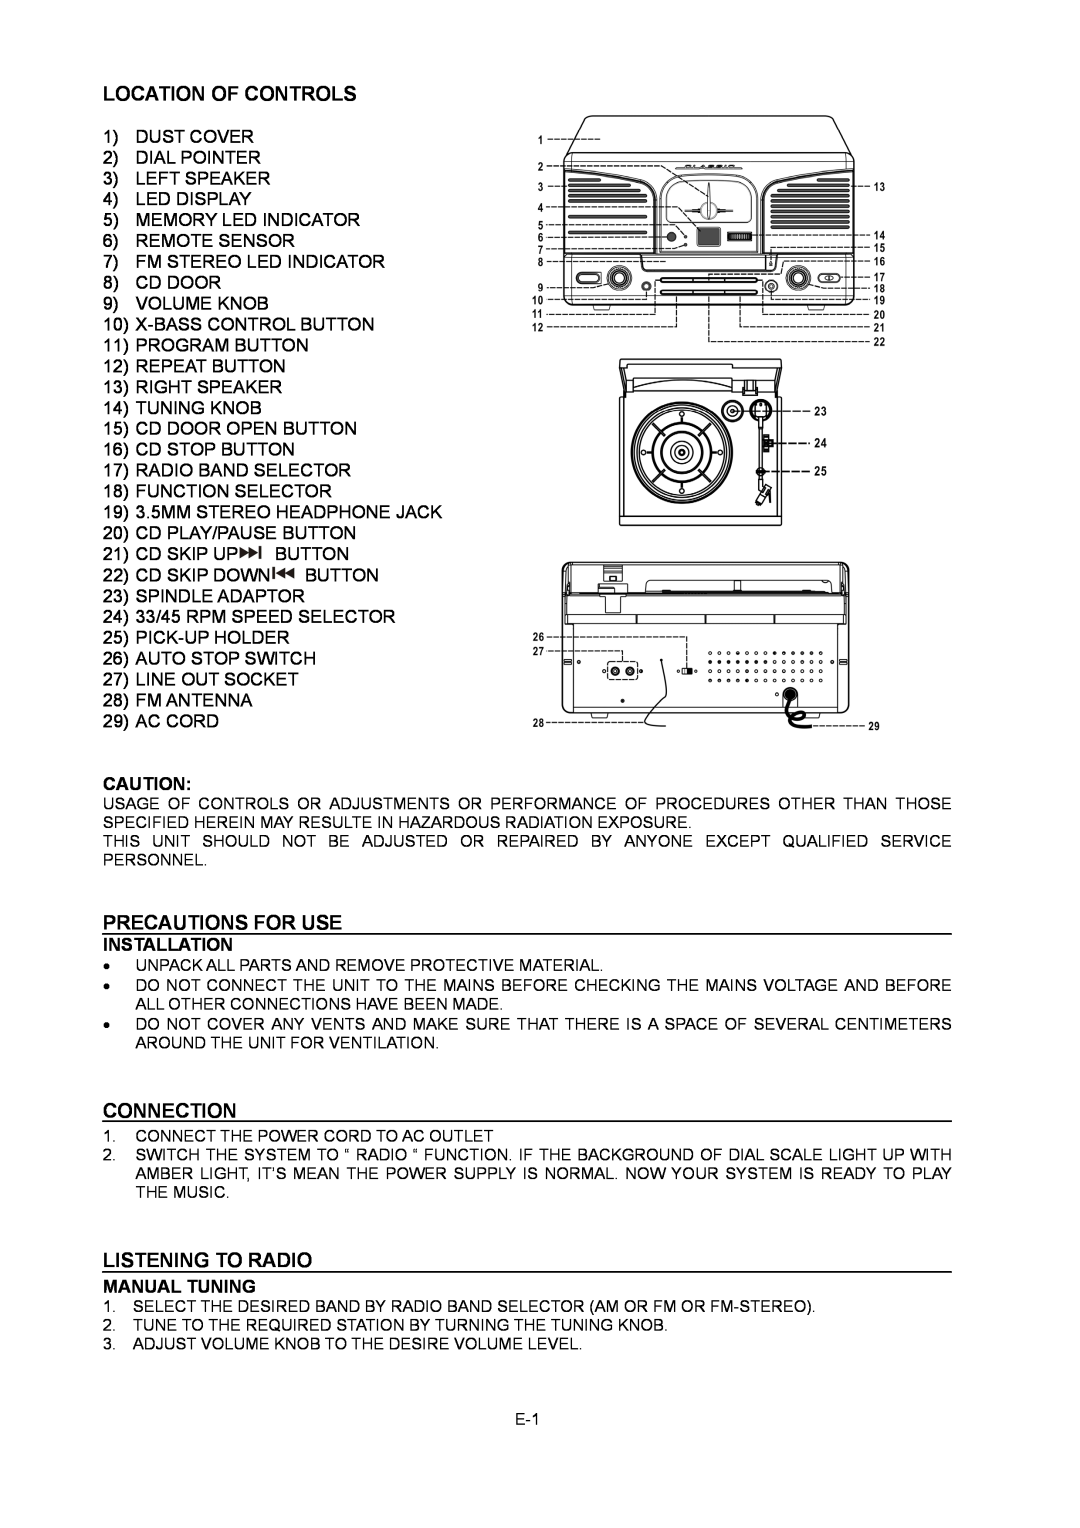 Curtis RCD824 Location Of Controls, Precautions For Use, Connection, Listening To Radio, Installation, Manual Tuning 